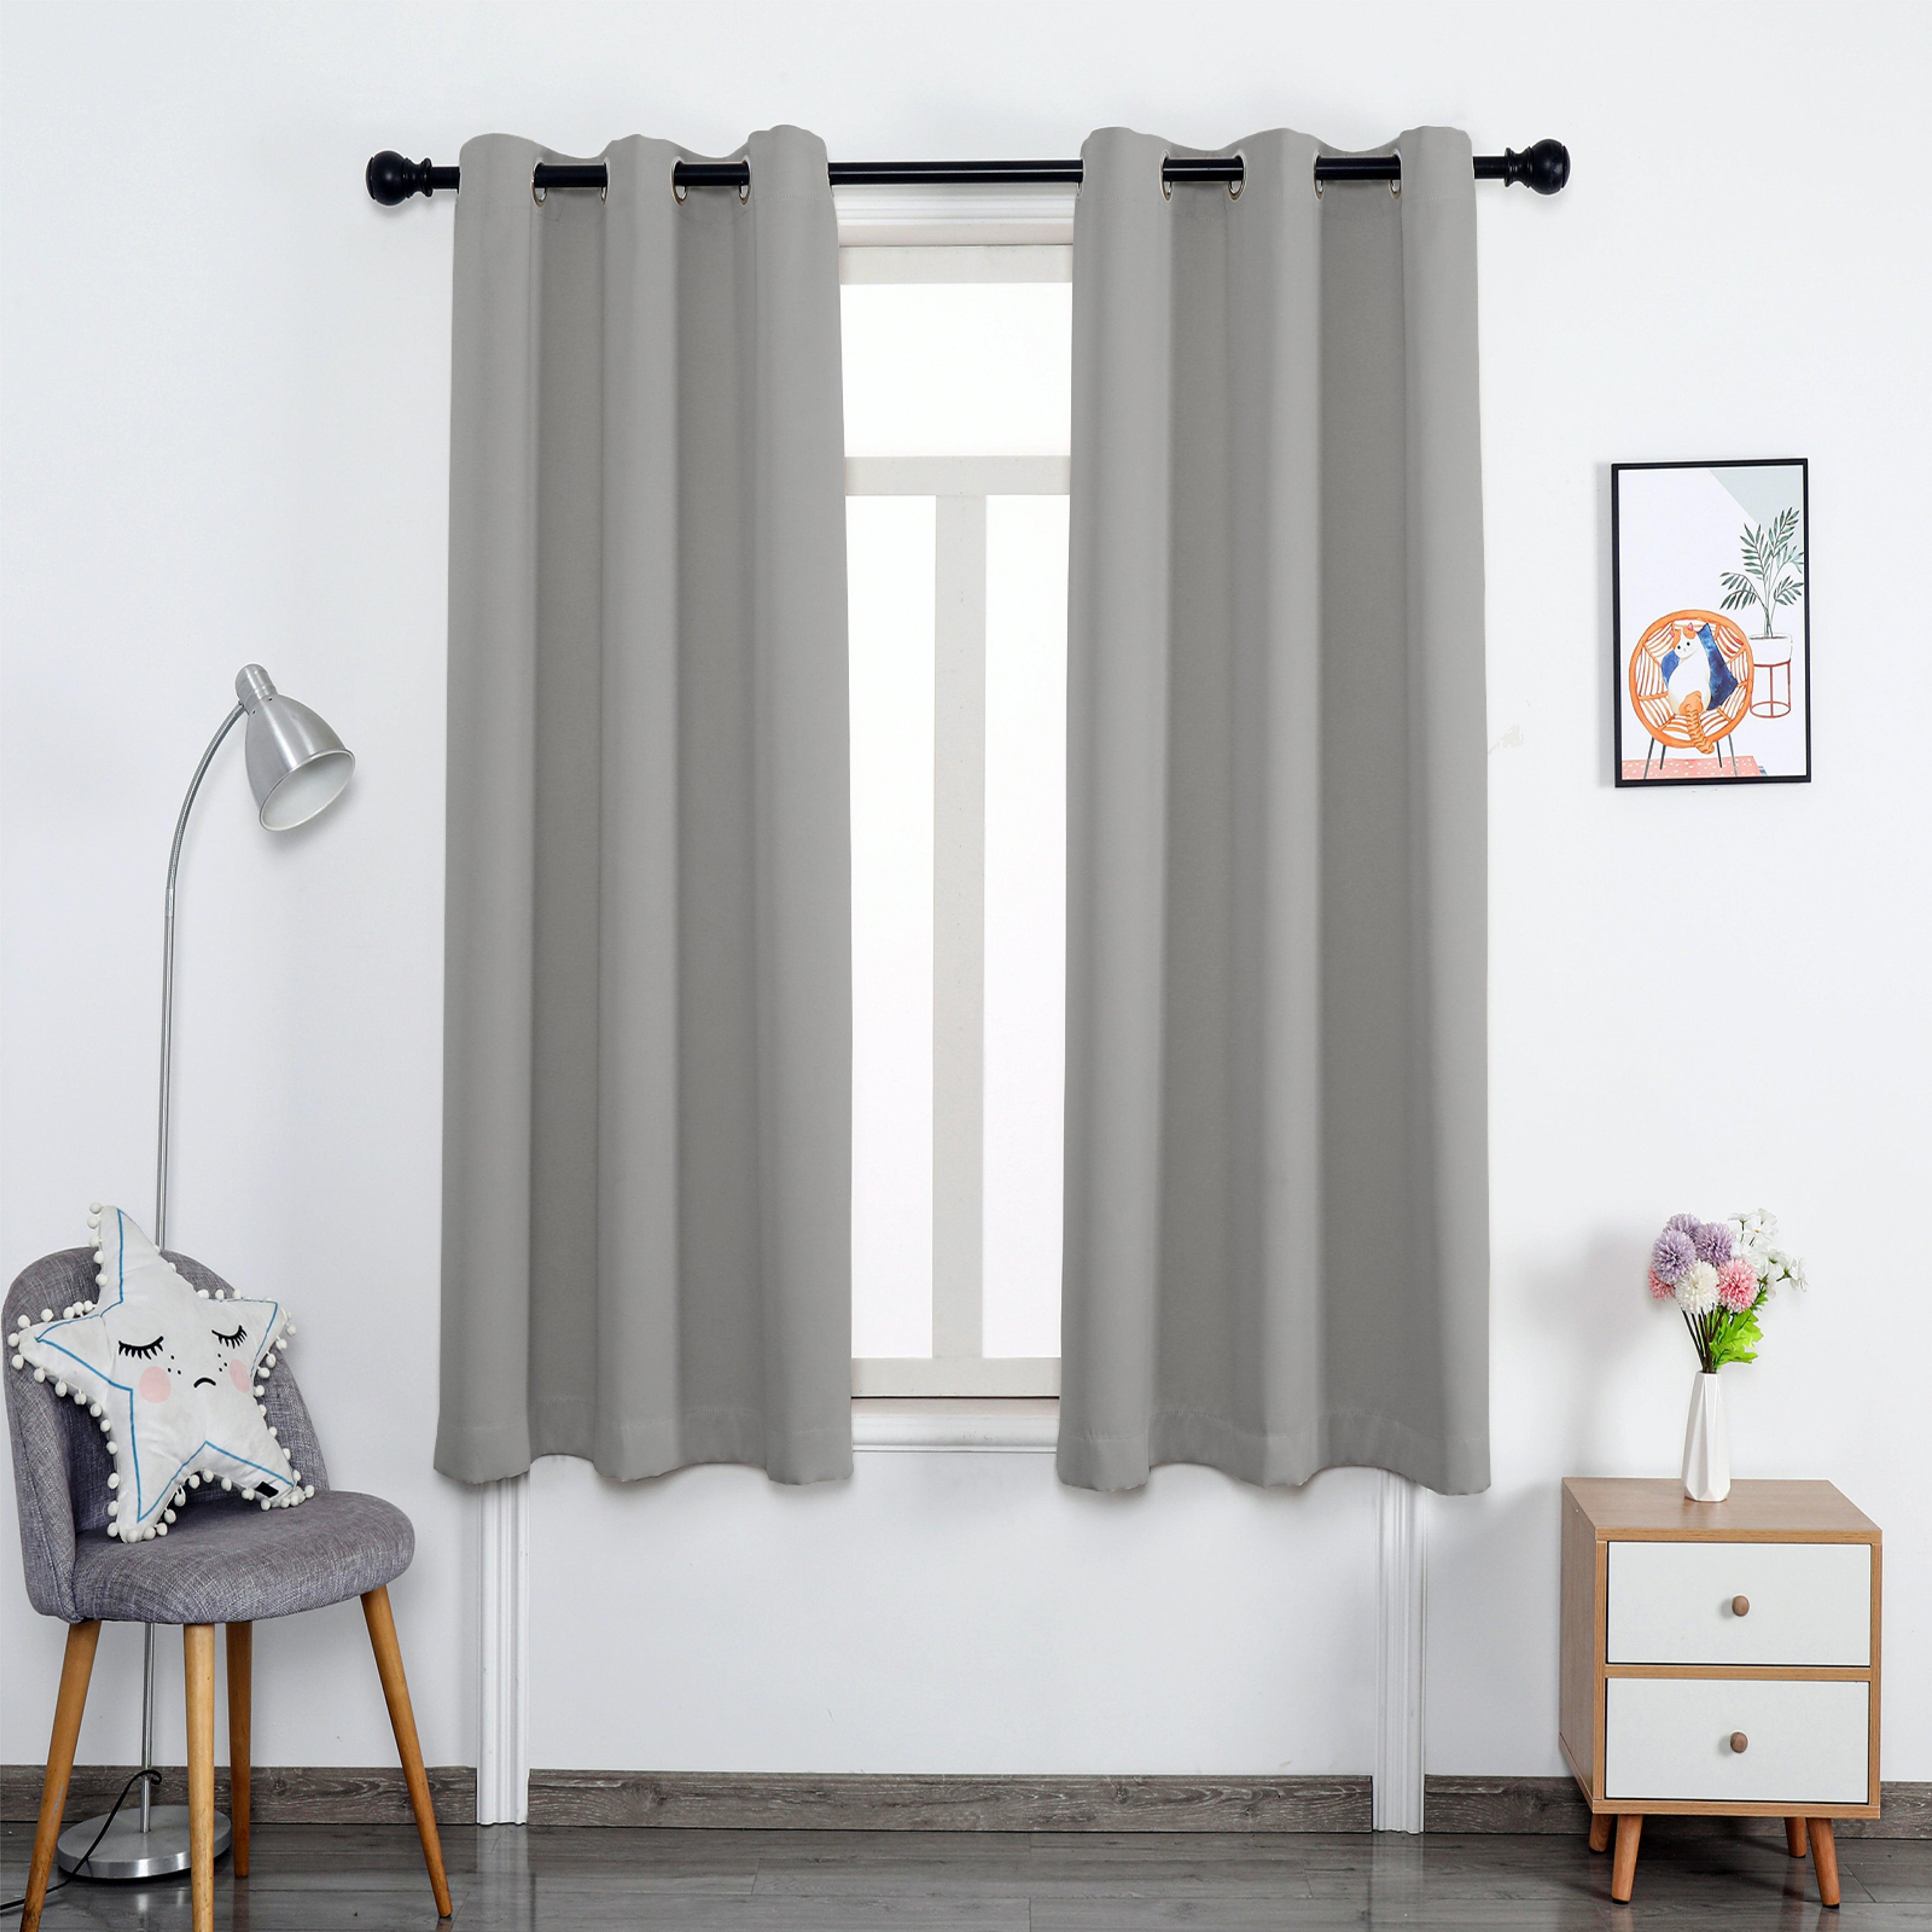 Hyper Cover 3-Layers Blockout Curtains Silver | Window Curtains | Brilliant Home Living